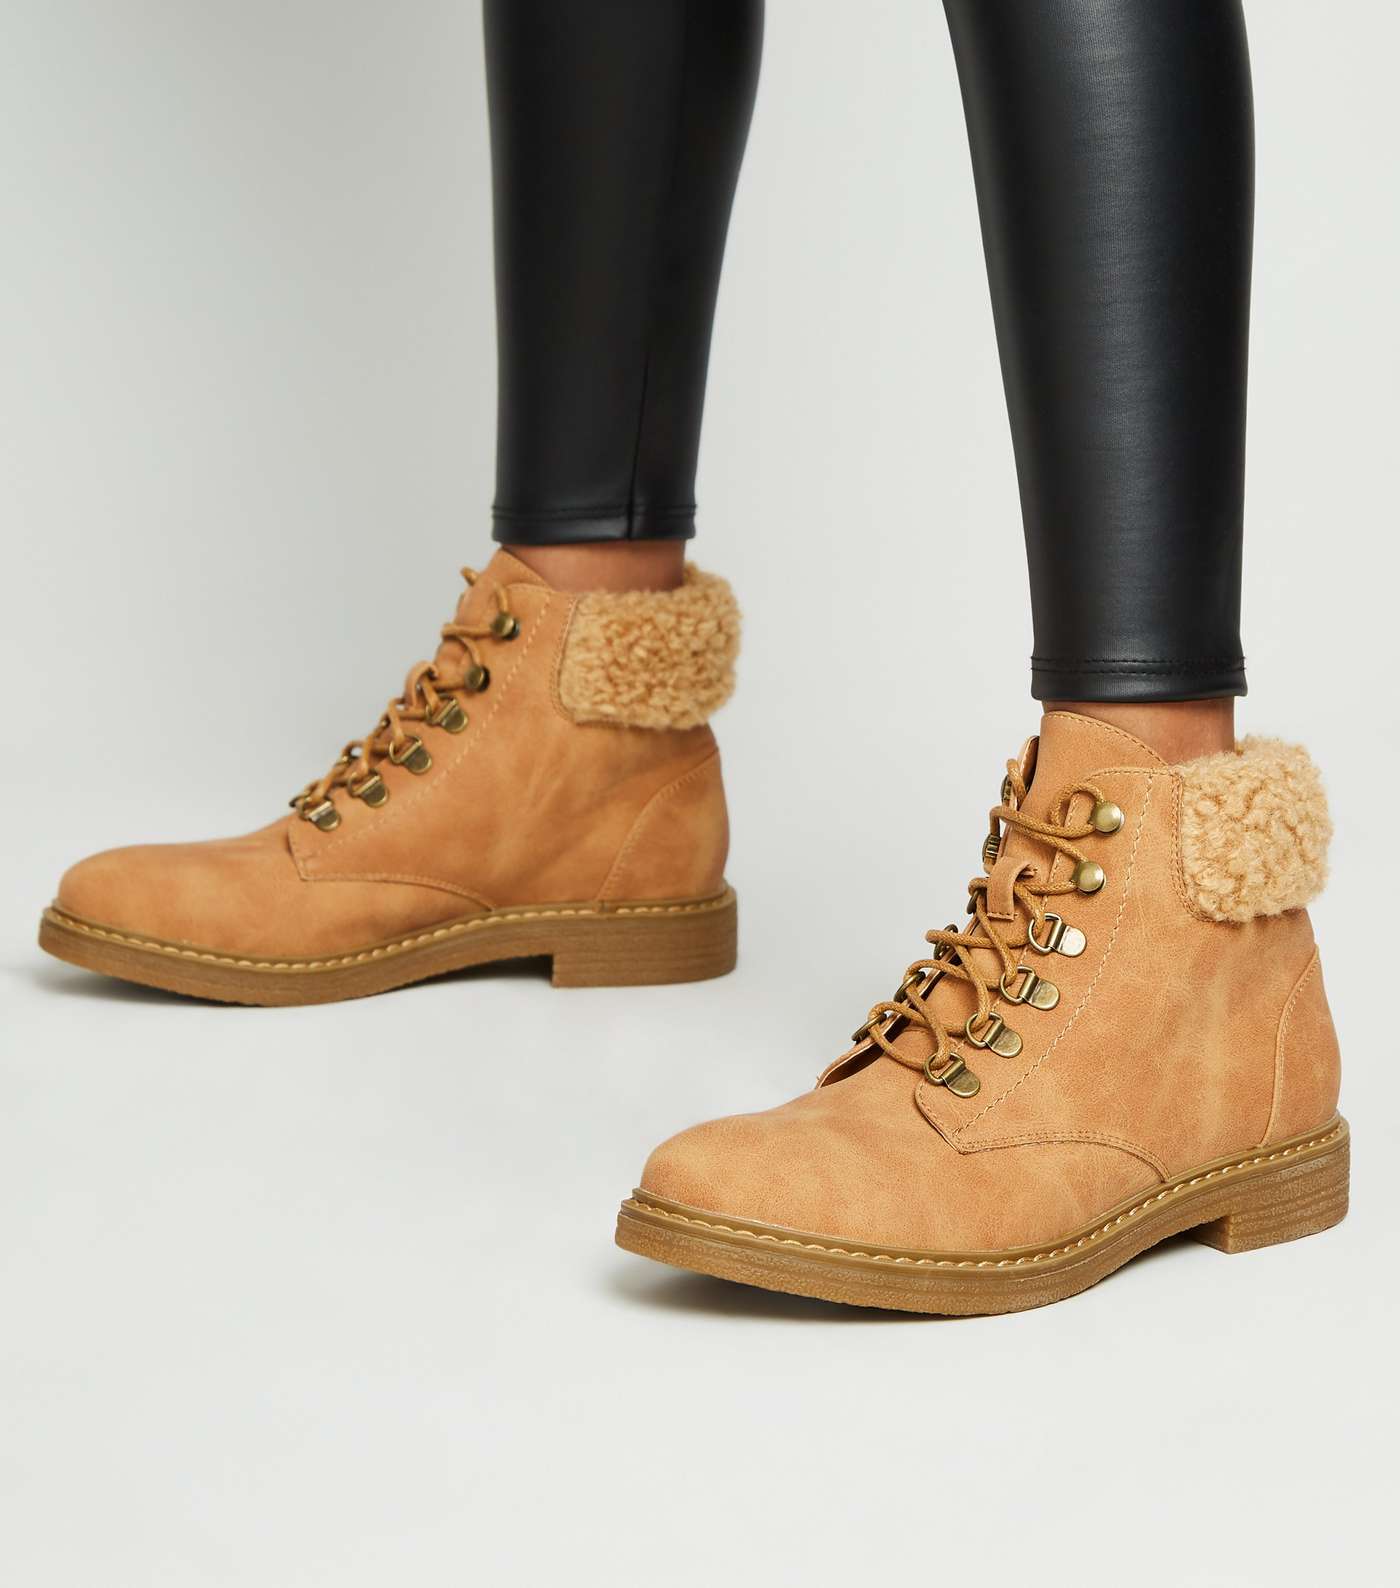 Girls Tan Teddy Trim Lace Up Boots Image 2